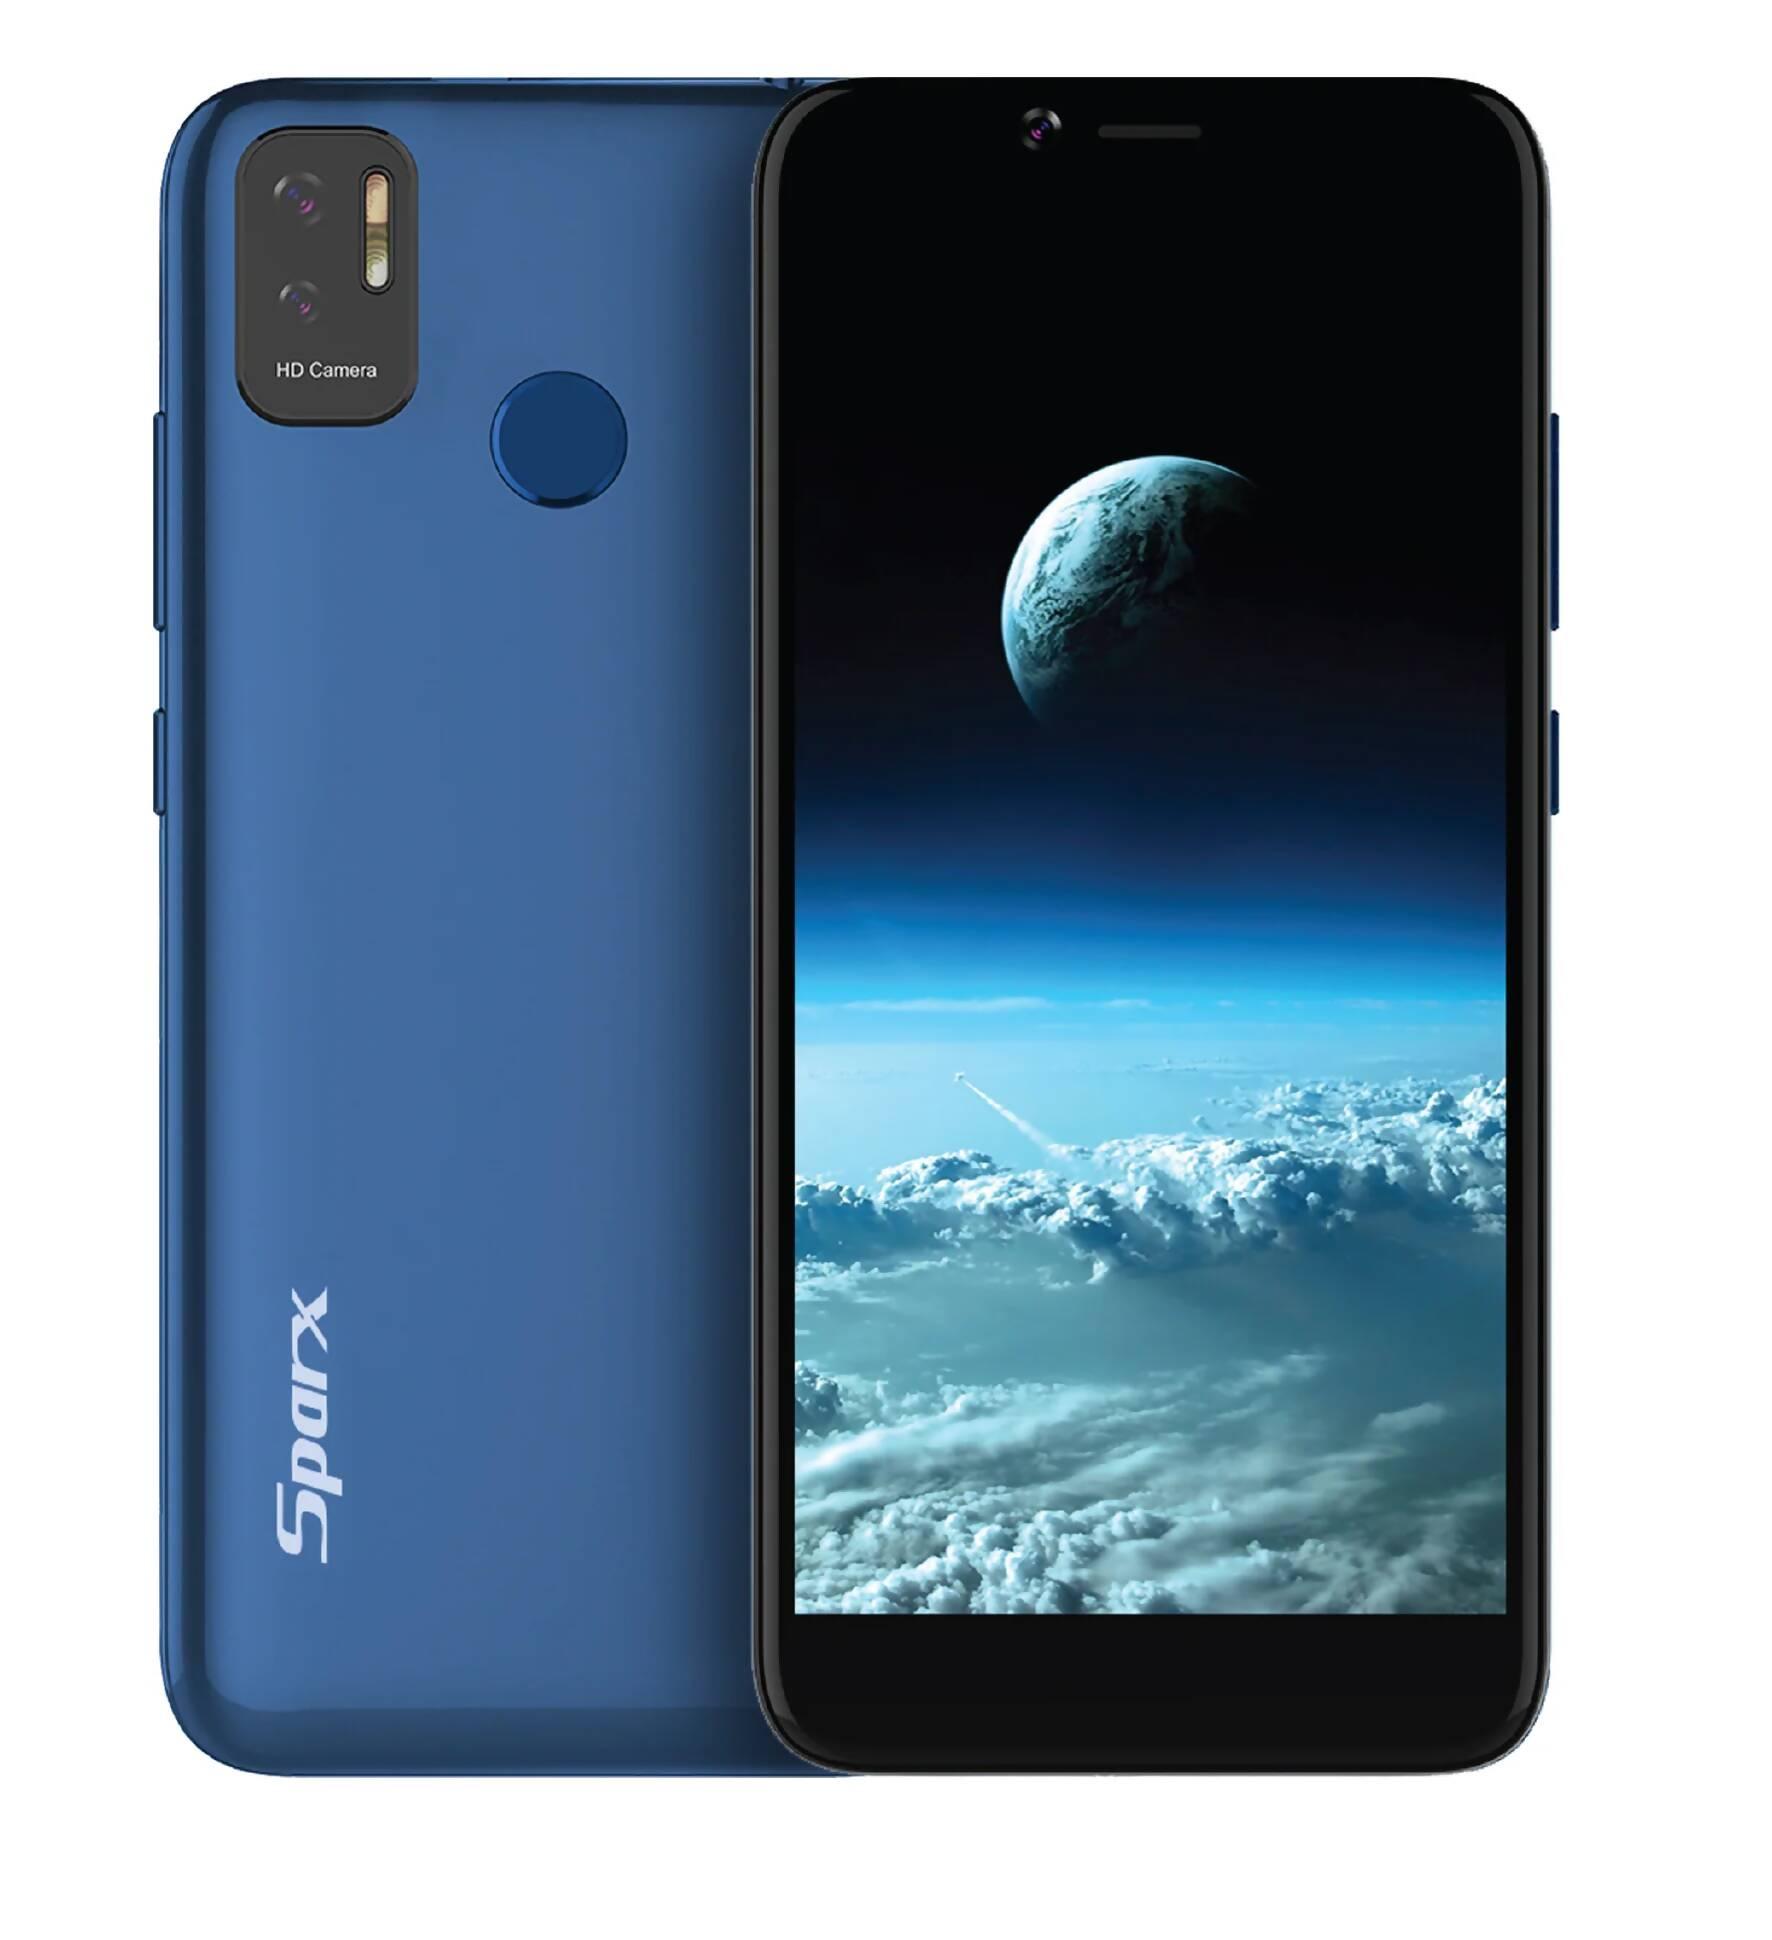 SPARX S3 2GB RAM 16GB ROM || 5.5" DISPLAY || 2700 mAh BATTERY || DUAL CAMERA || ONE YEAR BRAND WARRANTY || PTA APPROVED - ValueBox